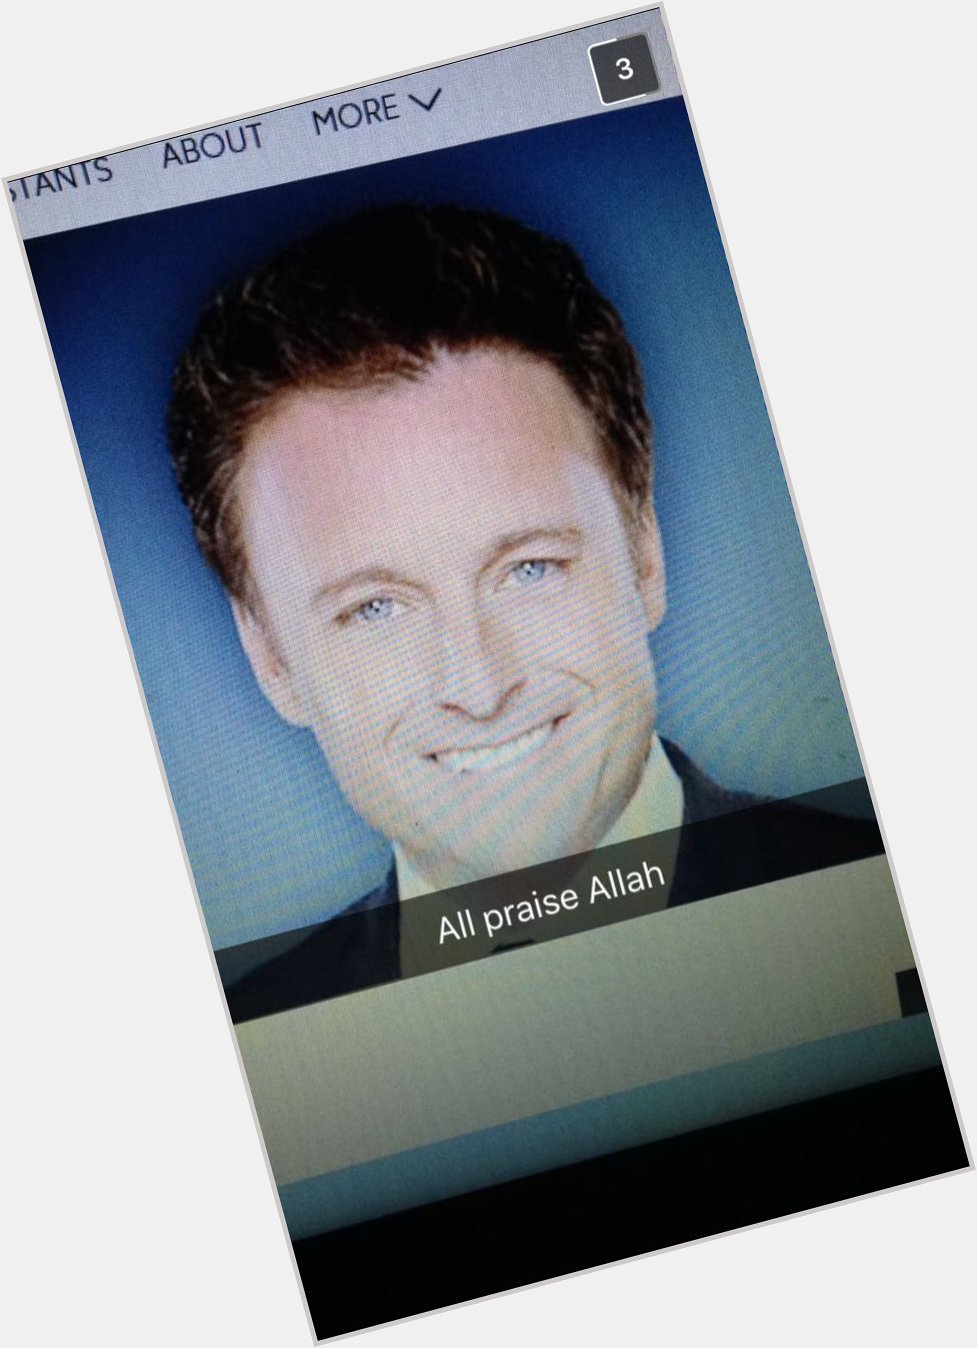 Happy birthday to our lord and savior Chris Harrison        